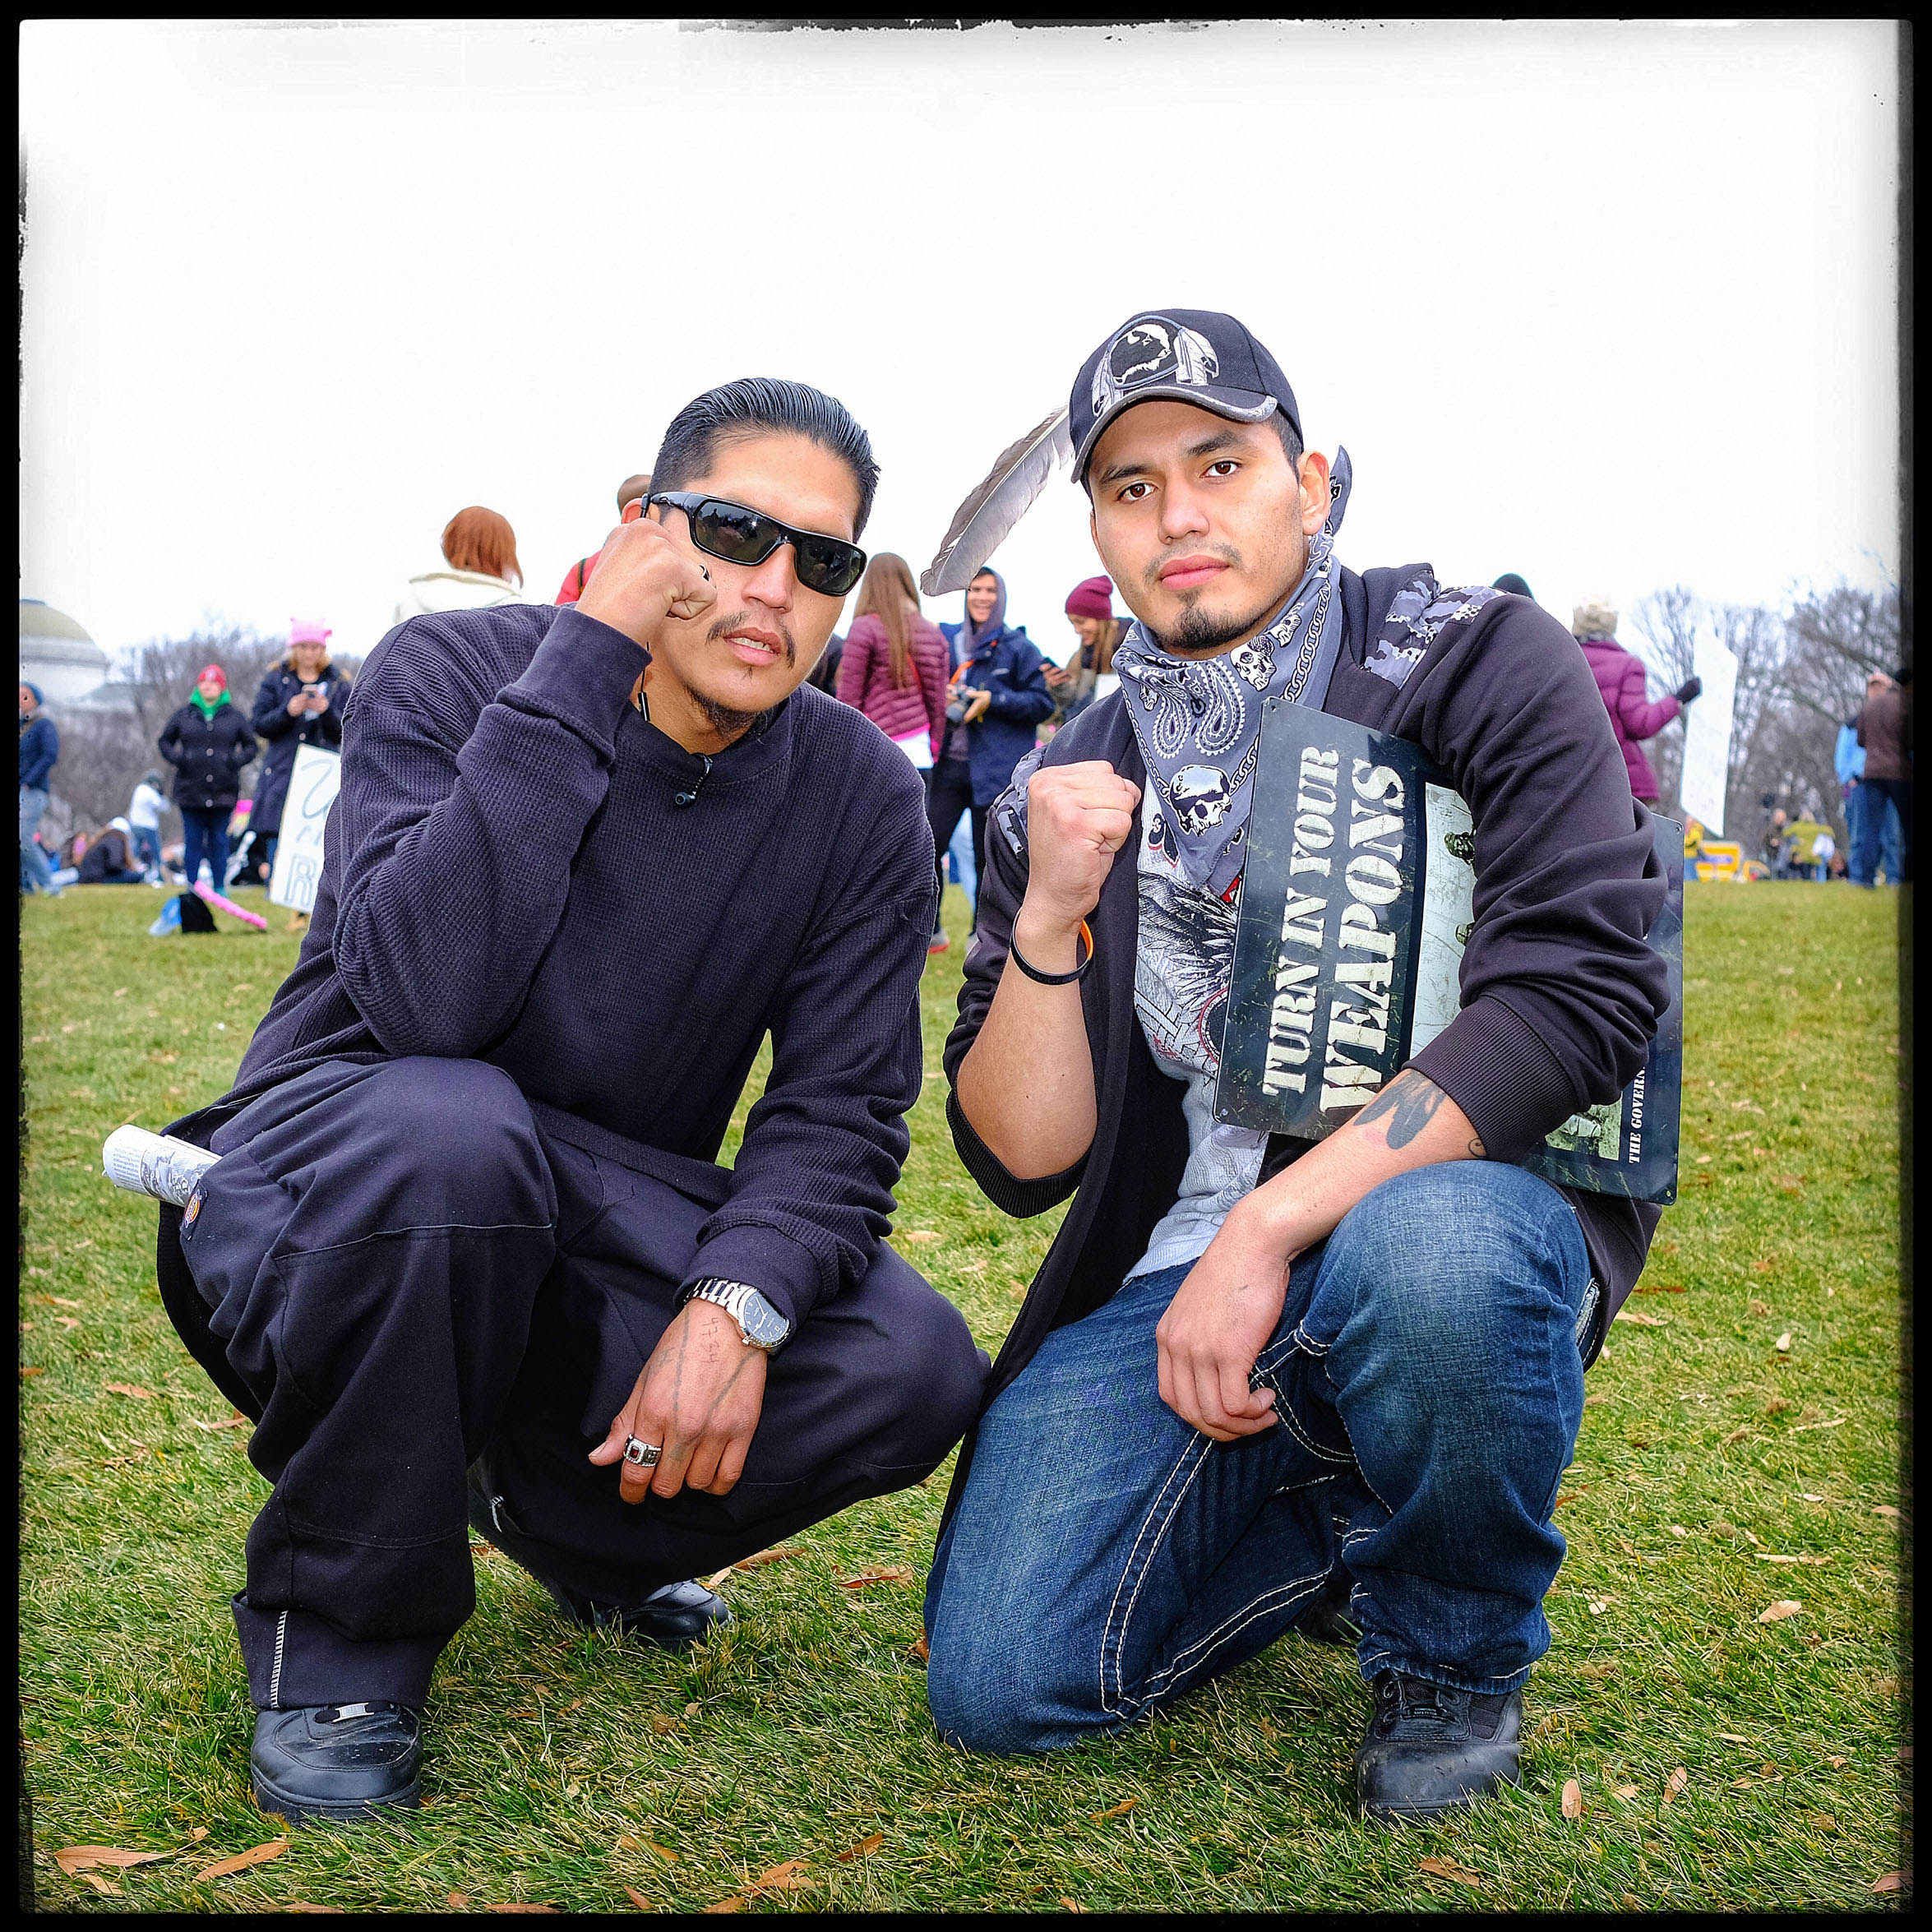 Madmax, right, 22 from New York City, with Chaske, 29, from Minneapolis. Both came to Washington to shed light on the situation in Standing Rock: "People like me are being arrested and charged for felonies that we don't deserve. I was charged for two felonies, reckless endangerment and criminal mischief," Madmax told me. Chaske added: "I came to support 'Sioux Z Dezbah' [a water protector who was injured in one eye] and all that she is doing to highlight our plight. I am here to support the women and to watch their backs."